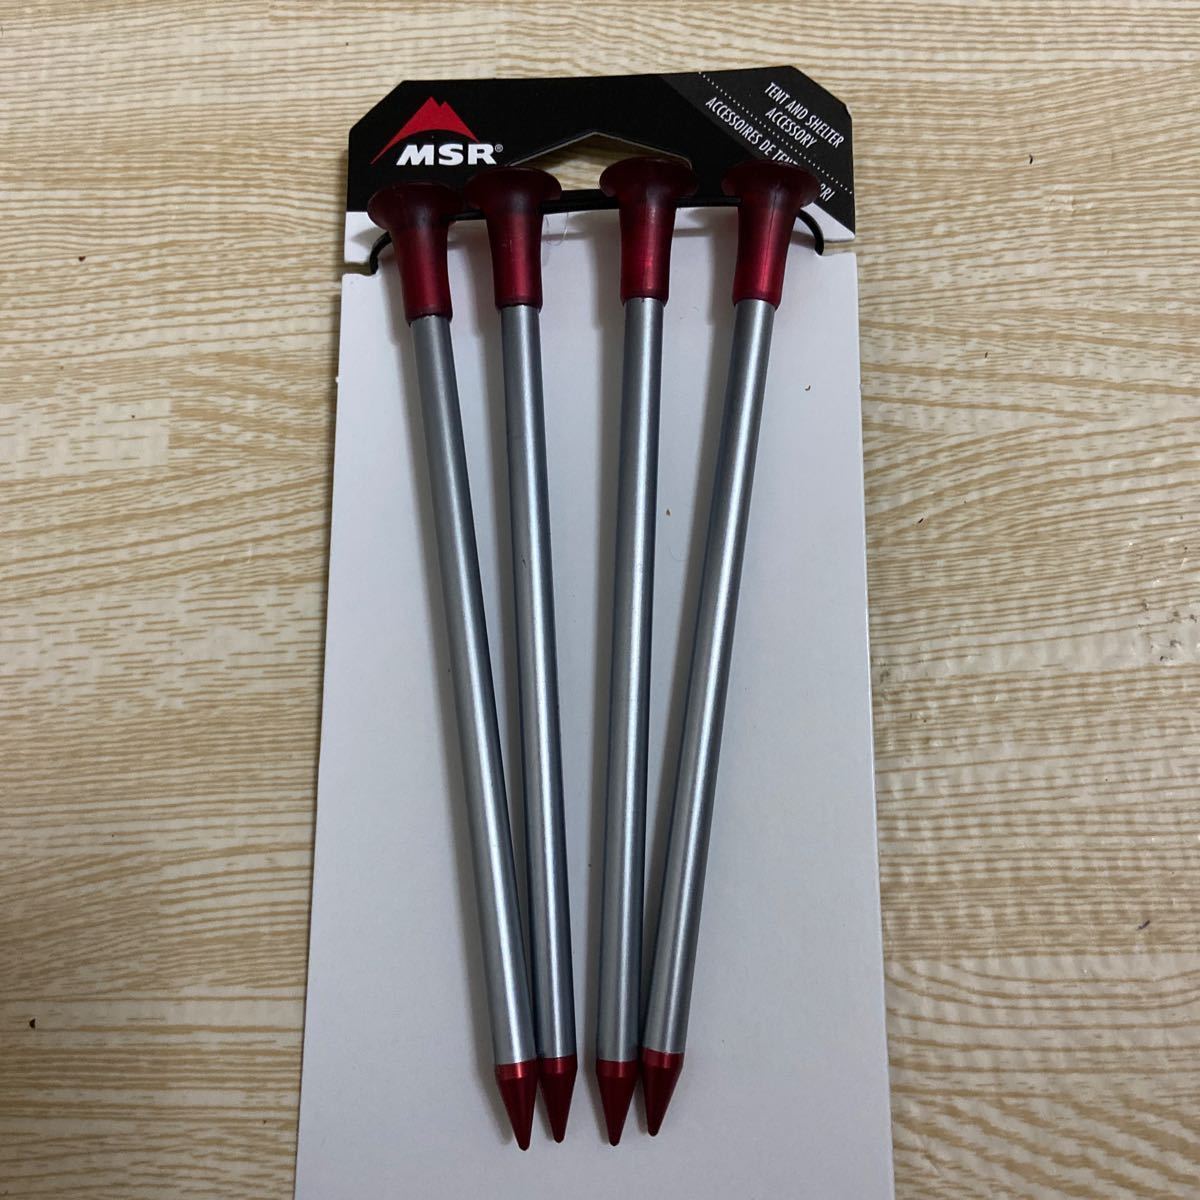 MSR carbon core stay k4 pcs set new goods American regular goods postage included 